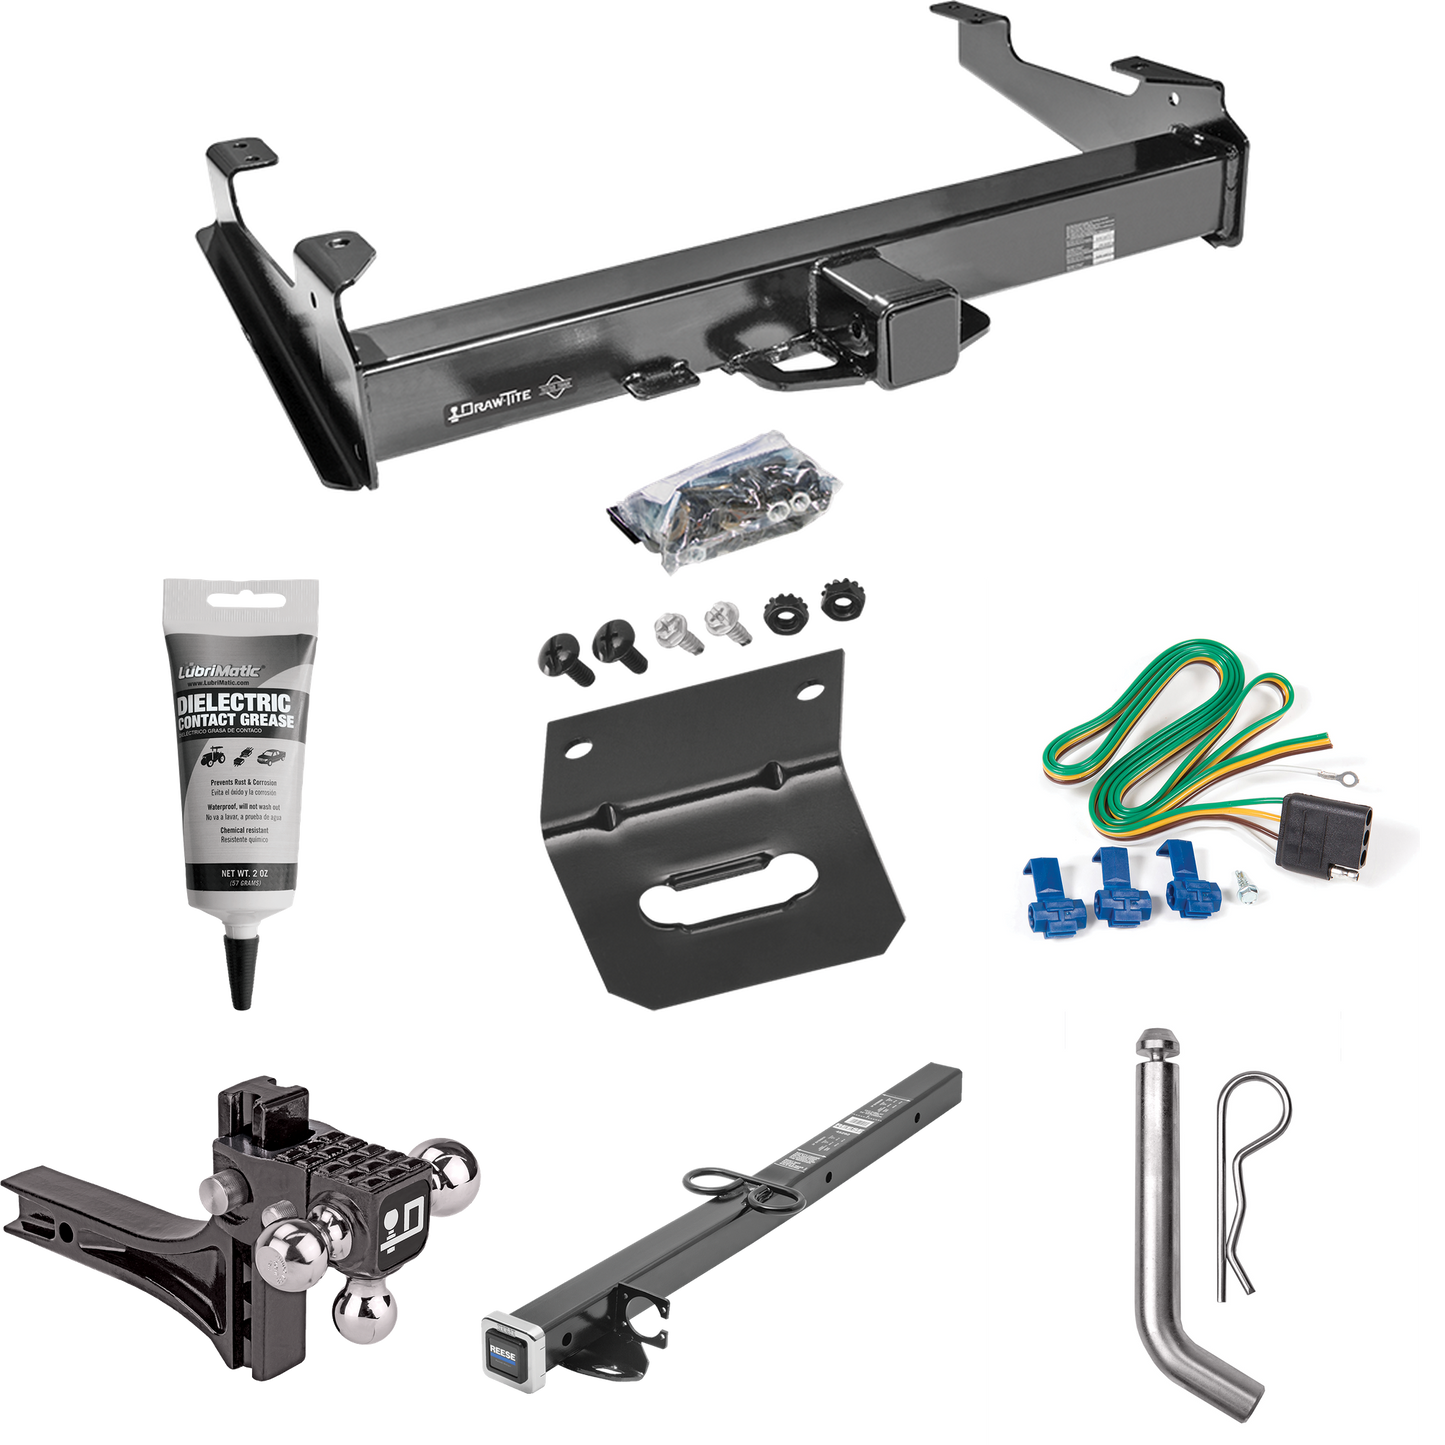 Fits 2001-2002 Chevrolet Silverado 2500 HD Trailer Hitch Tow PKG w/ 4-Flat Wiring Harness + 2-1/2" to 2" Adapter 24" Length + Adjustable Drop Rise Triple Ball Ball Mount 1-7/8" & 2" & 2-5/16" Trailer Balls + Pin/Clip + Wiring Bracket + Electric Greas